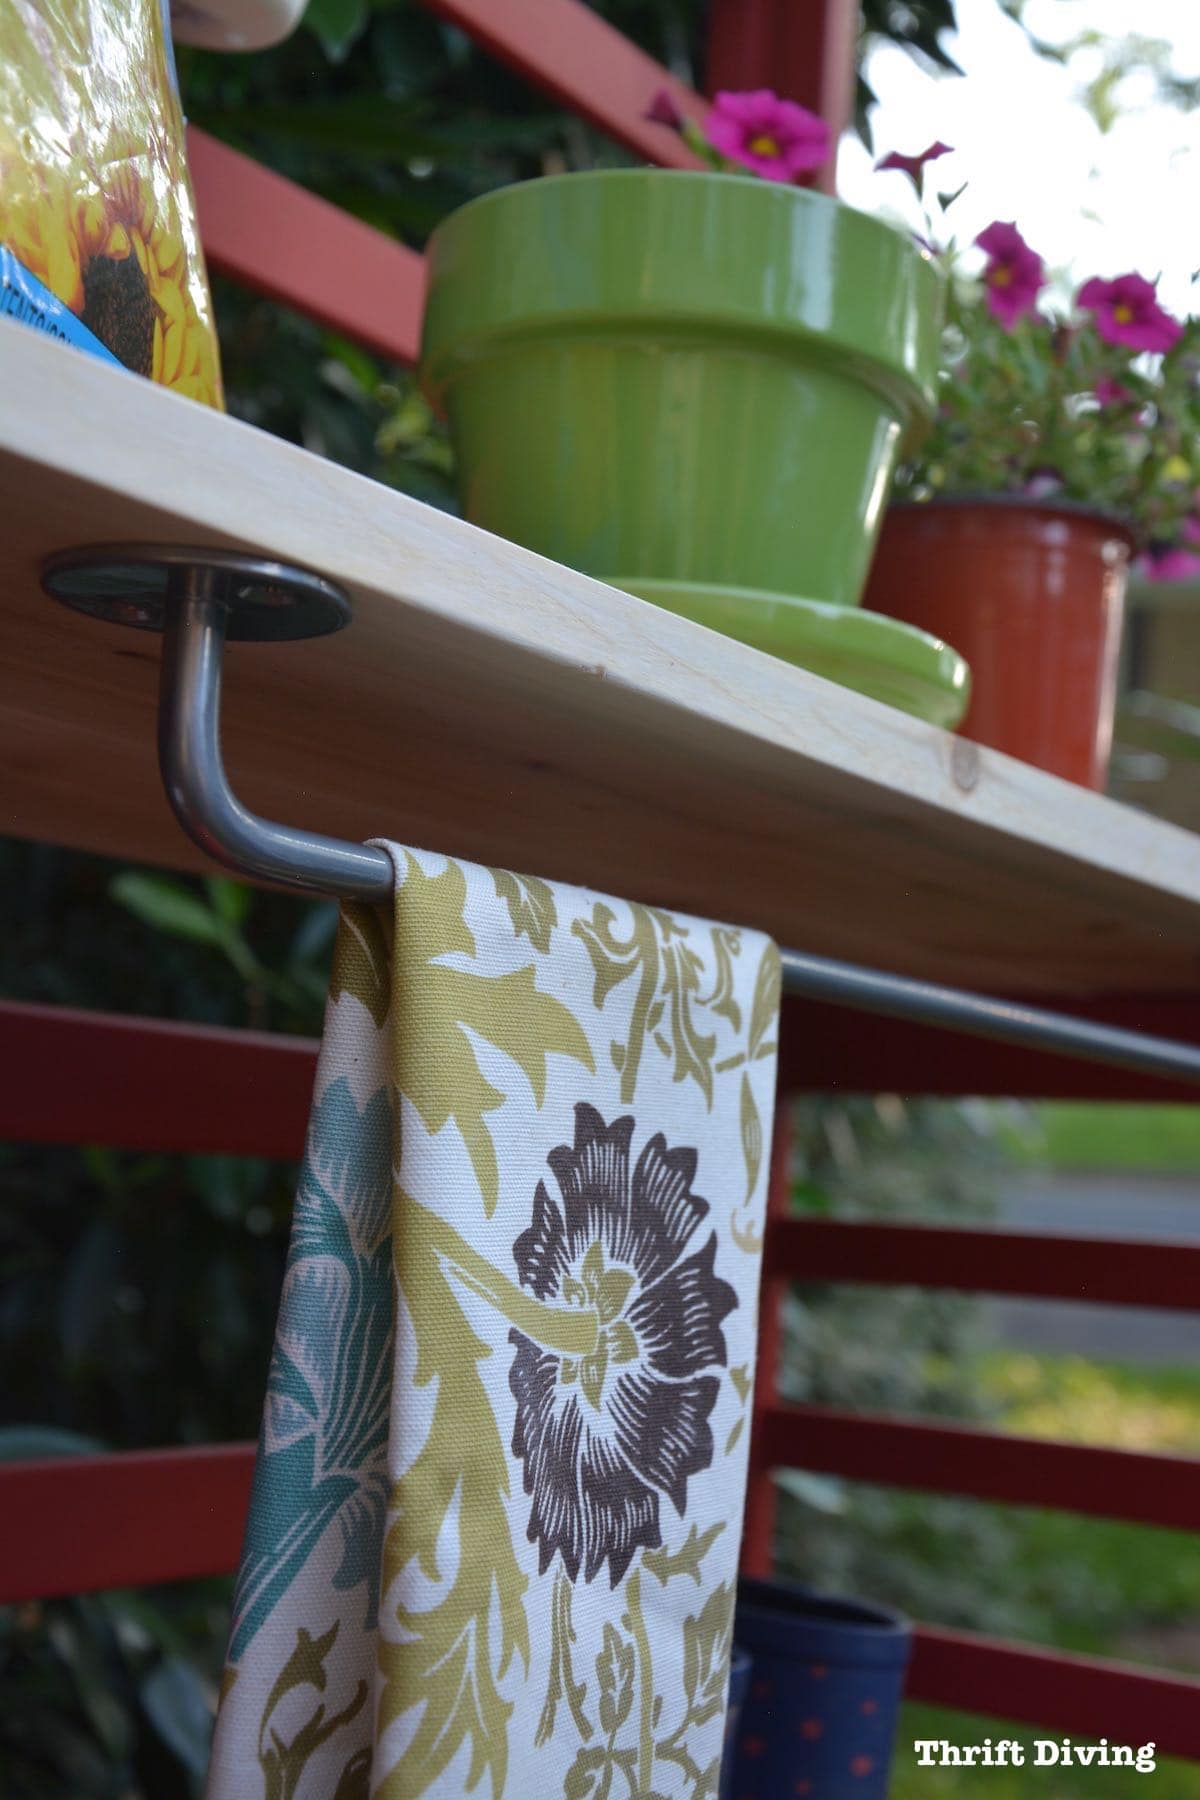 Repurposed toddler bed: What to do with an old toddler bed - Turn a toddler bed into a garden bench and add a towel bar. - Thrift Diving